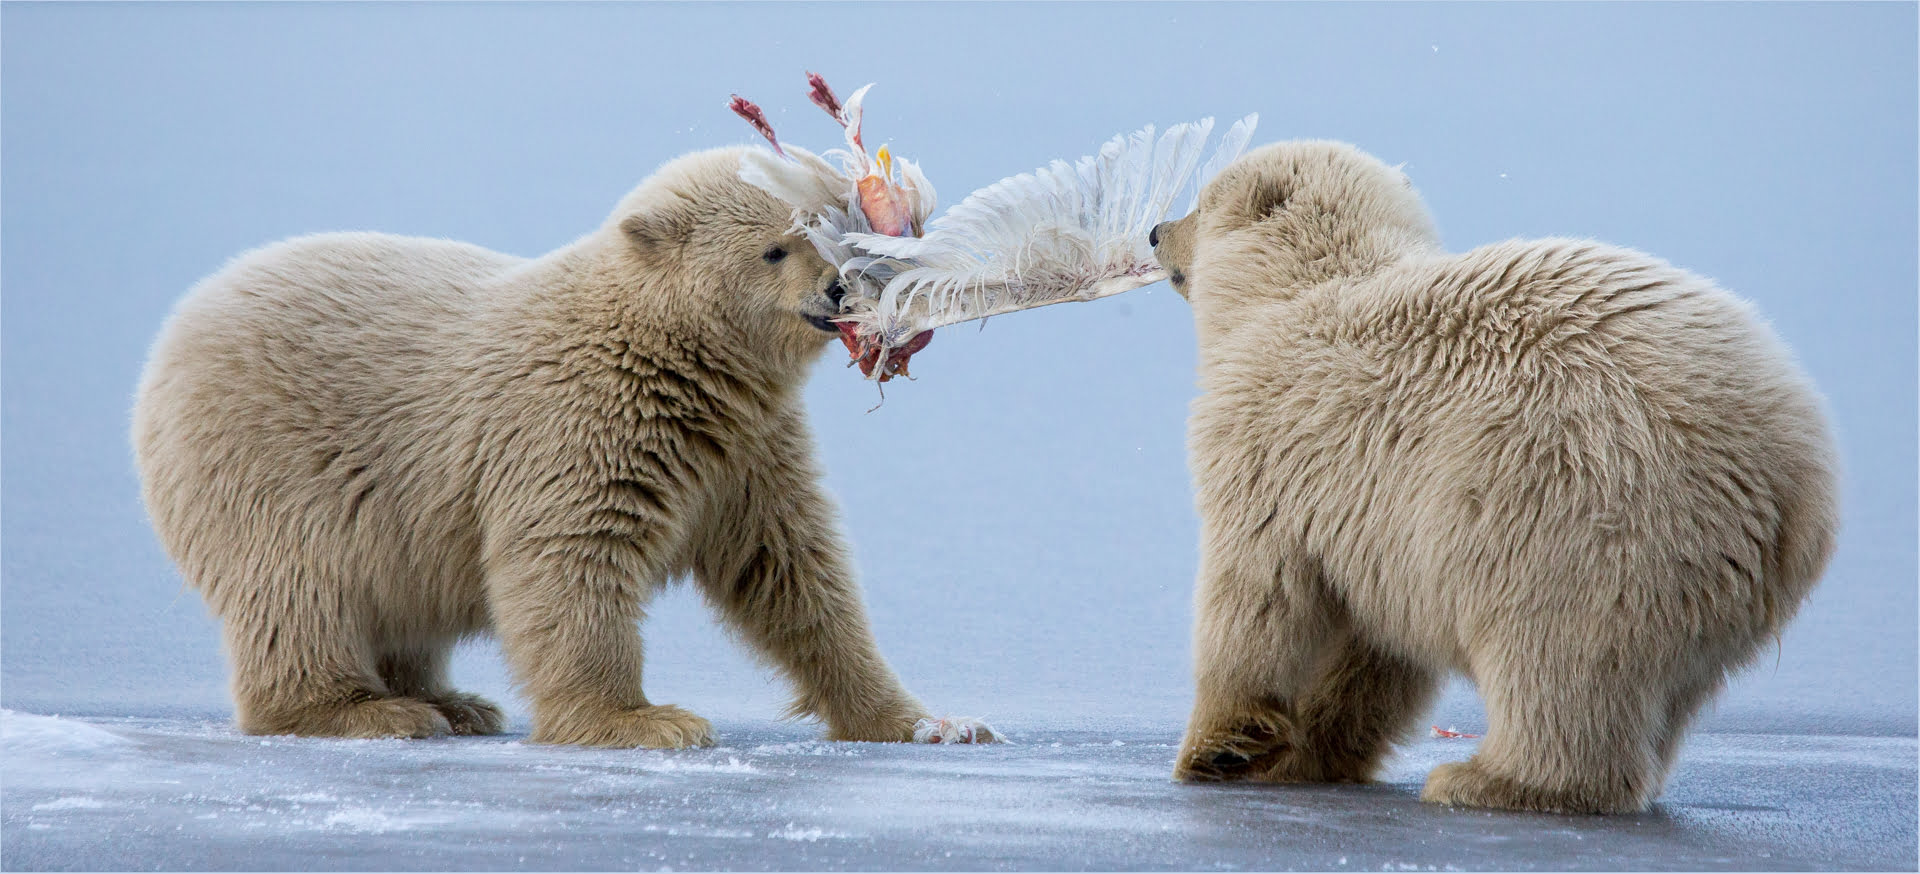 Best Salon Picture of the Year -Nature - Karyn Parisi - Fish Hoek Photographic Society -Polar Cubs Tug of War